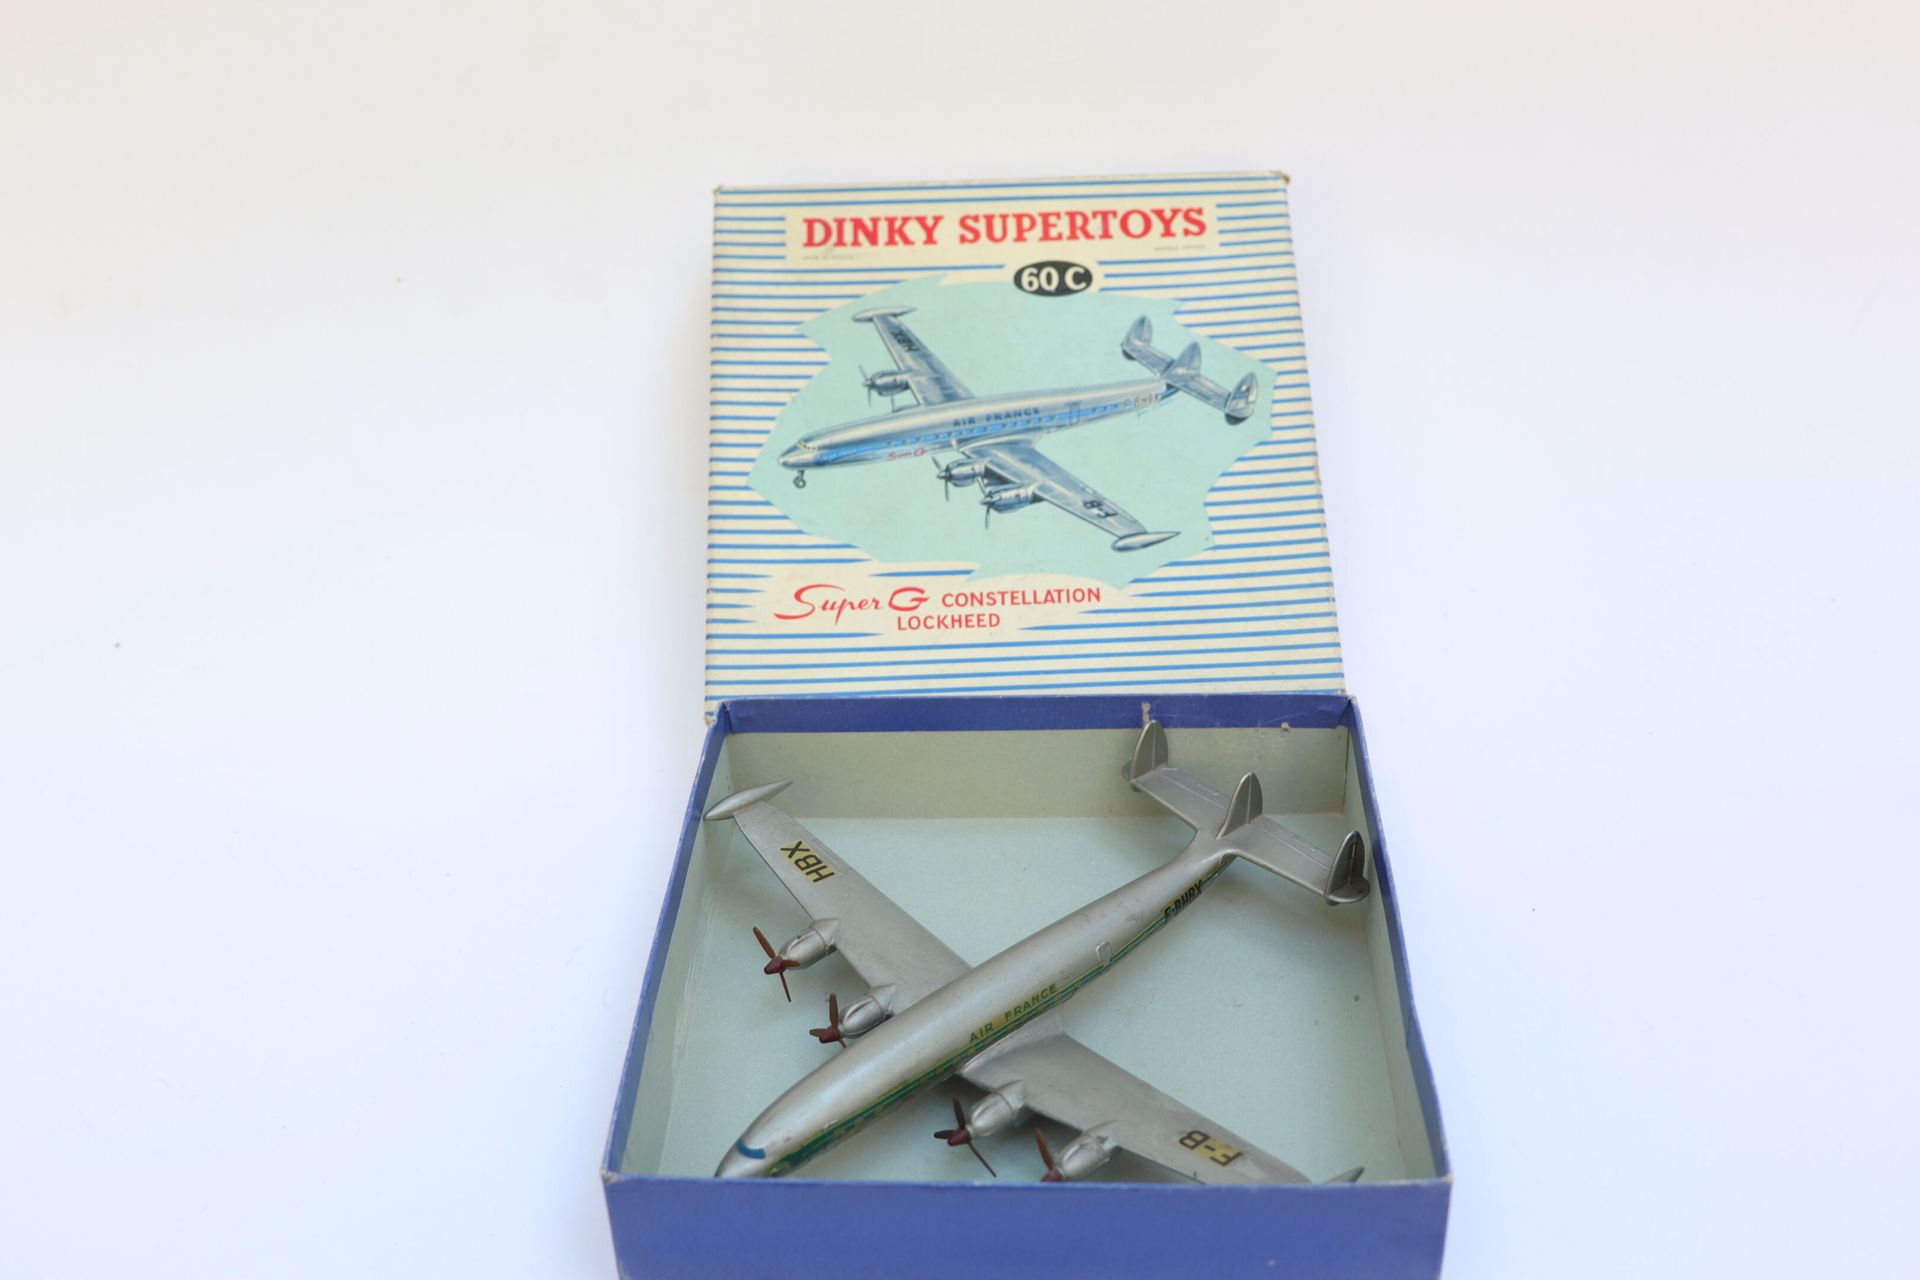 Null LOCKHEED SUPER G CONSTELLATION AIR FRANCE.

Dinky Supertoys.

Modello in me&hellip;